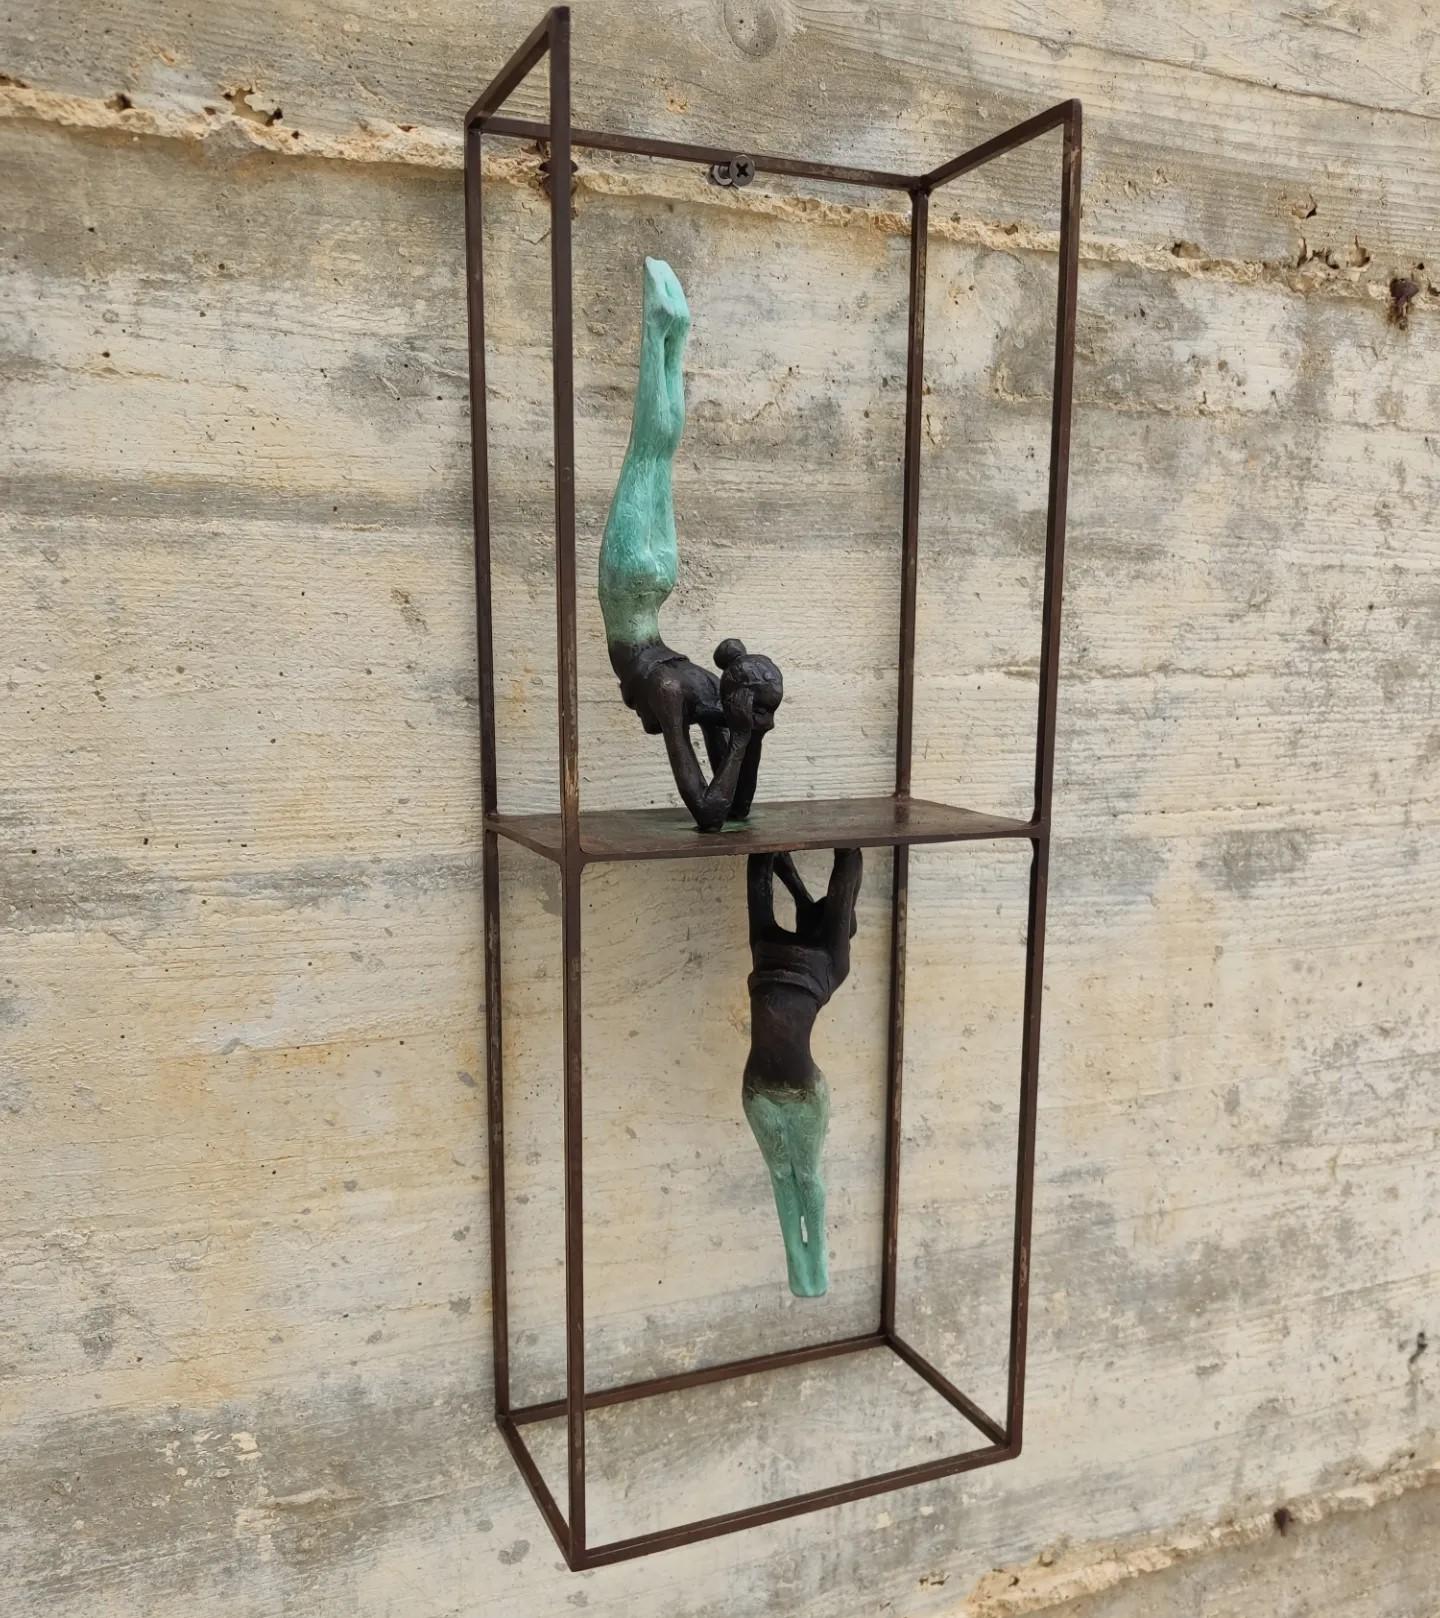 Reflex is bronze sculpture wall table sculpture, it is connected to a steel base. The sculpture depicts human figures in a dynamic pose, as if caught in mid-movement. The fluid lines of the sculpture give the impression of energy and motion. Reflex